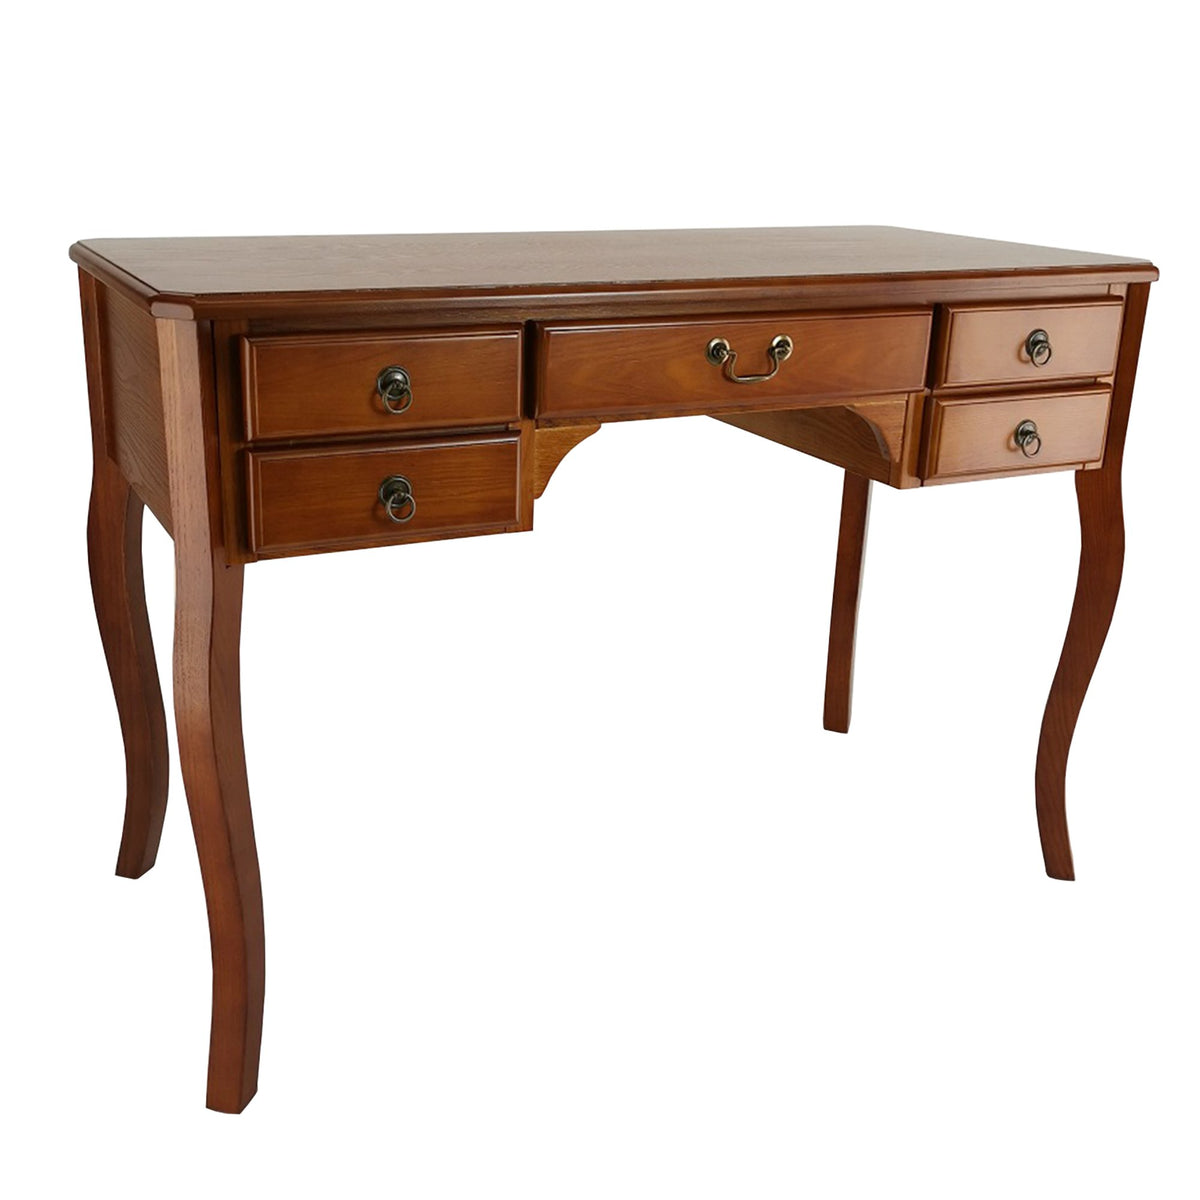 Wooden Writing Desk with Cabriole Legs and 5 Drawers, Brown - BM213488